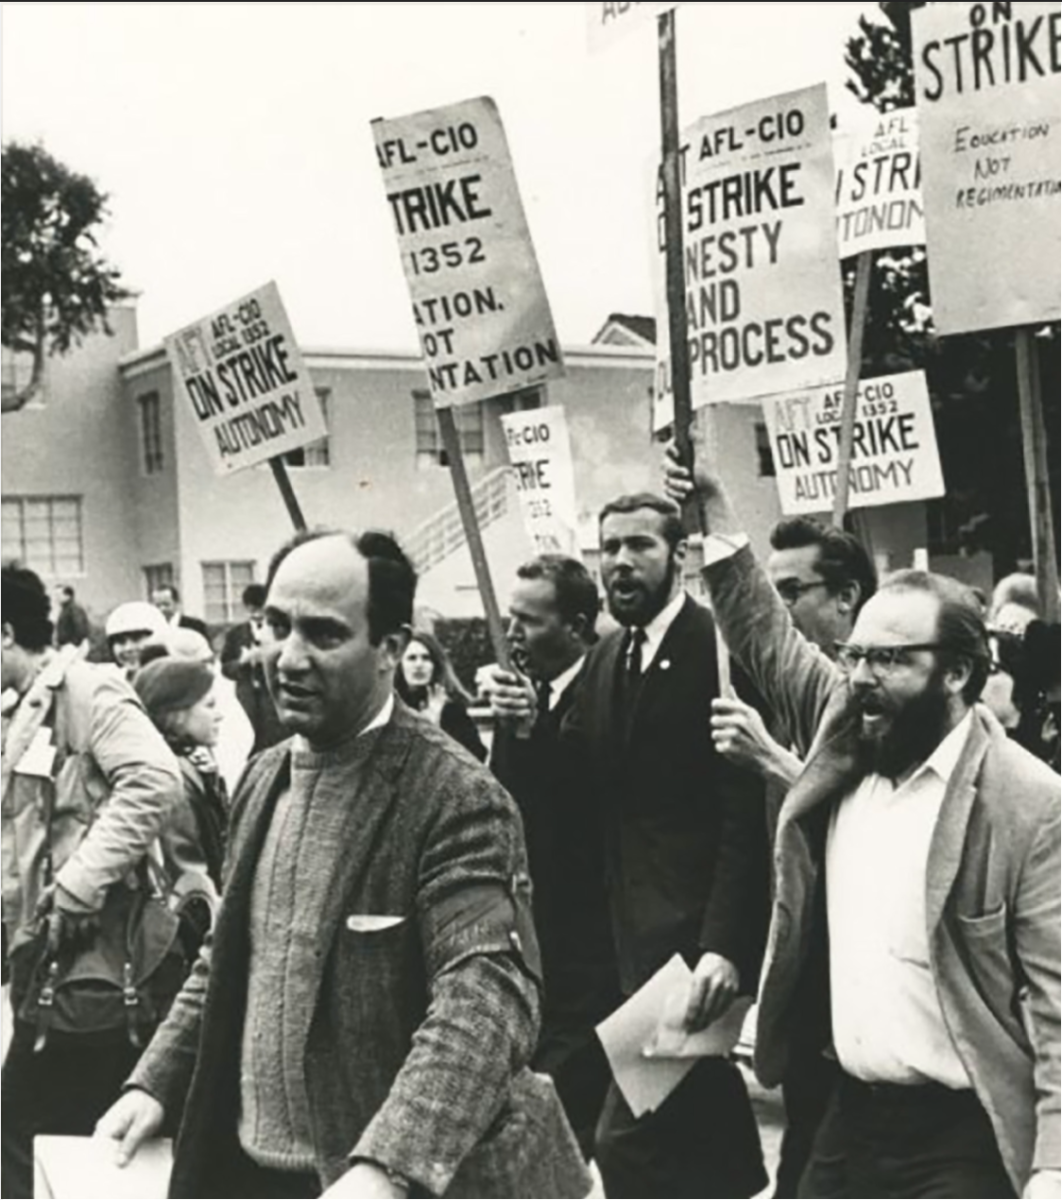 The+American+Federation+of+Teachers+marches+with+picket+signs+during+the+ethnic+studies+strike+of+1968.+%28Terry+Schmitt%2FCourtesy+of+University+Archives%29